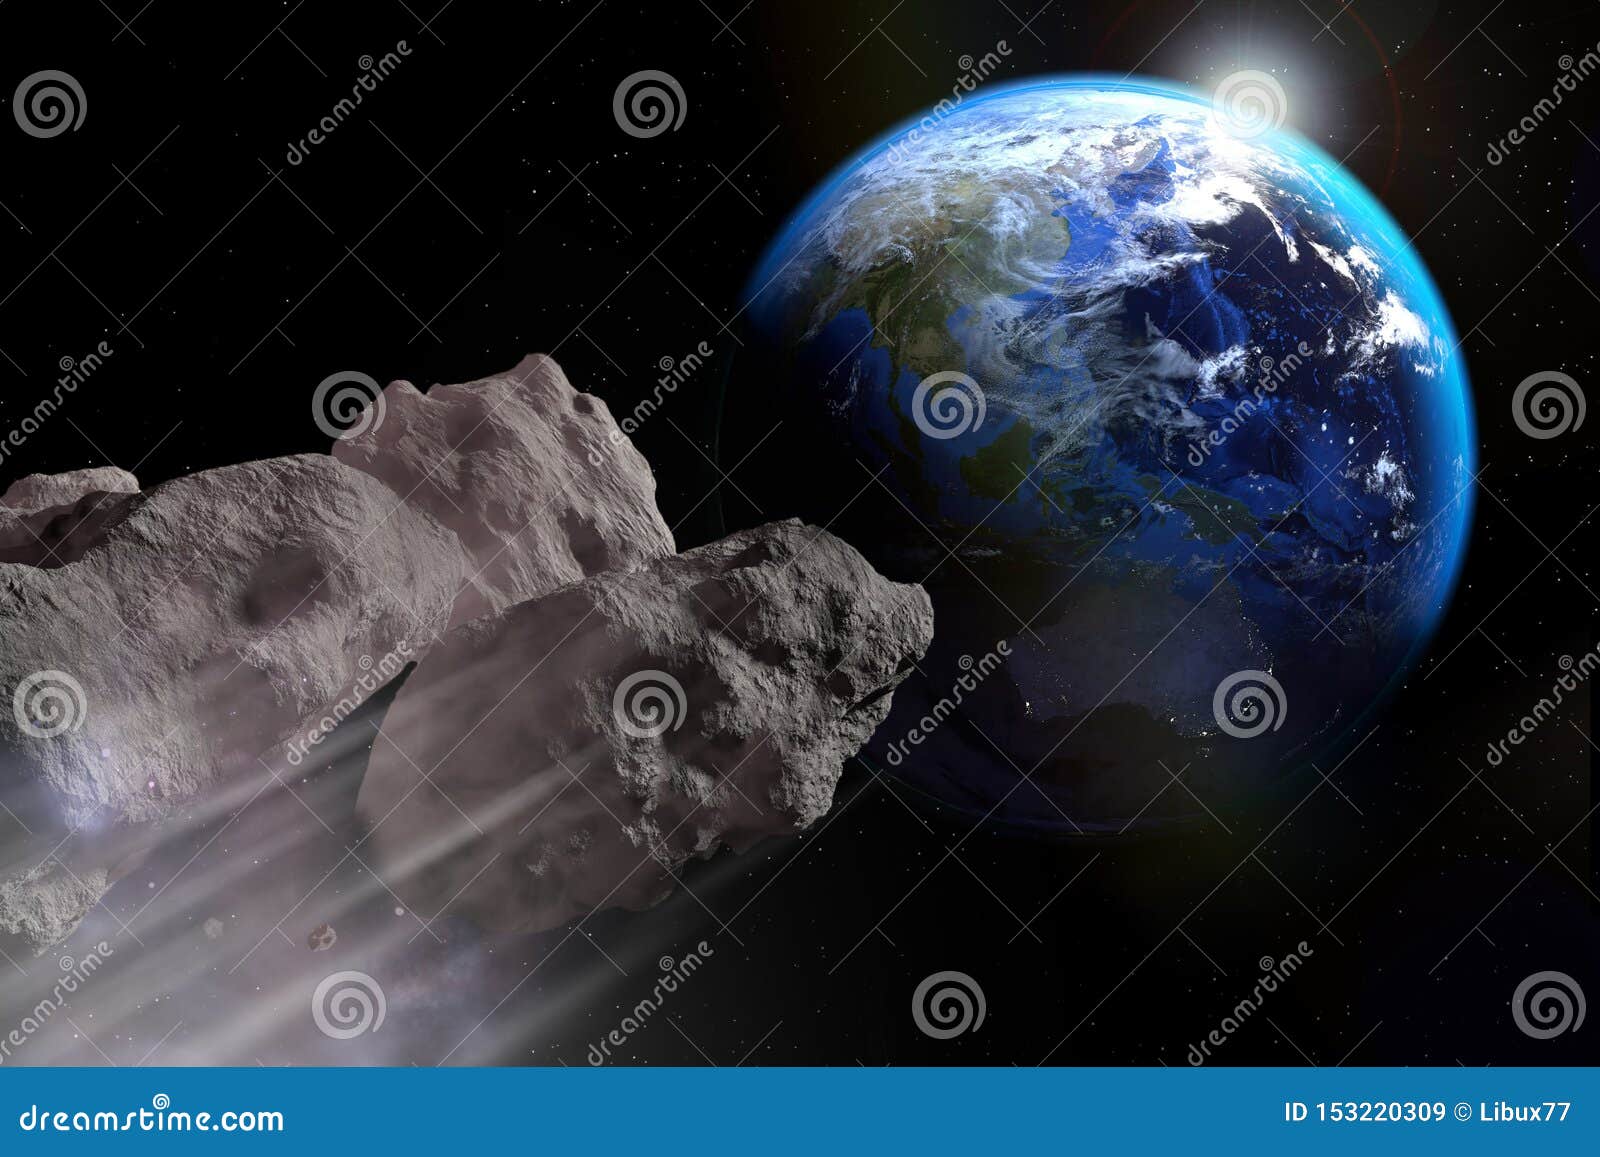 asteroid is about to impact on earth`s surface